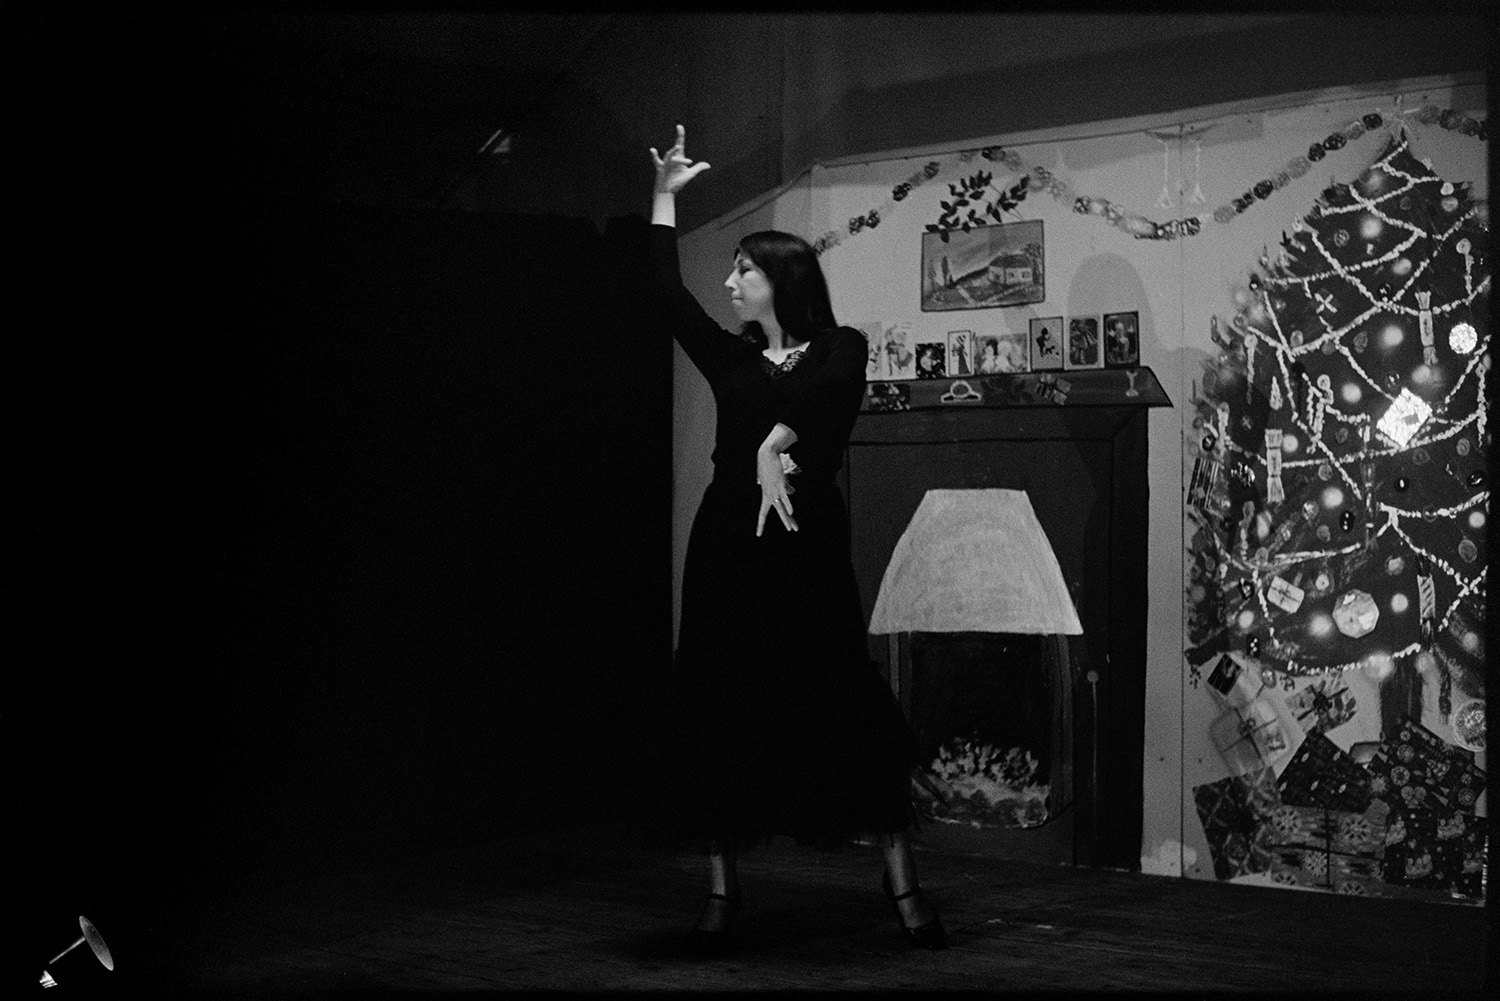 Christmas entertainment in village hall, singing and dance, short plays.
[A woman dancing against a backdrop of a fireplace and Christmas tree on stage at High Bickington village hall at an evening of Christmas entertainment.]